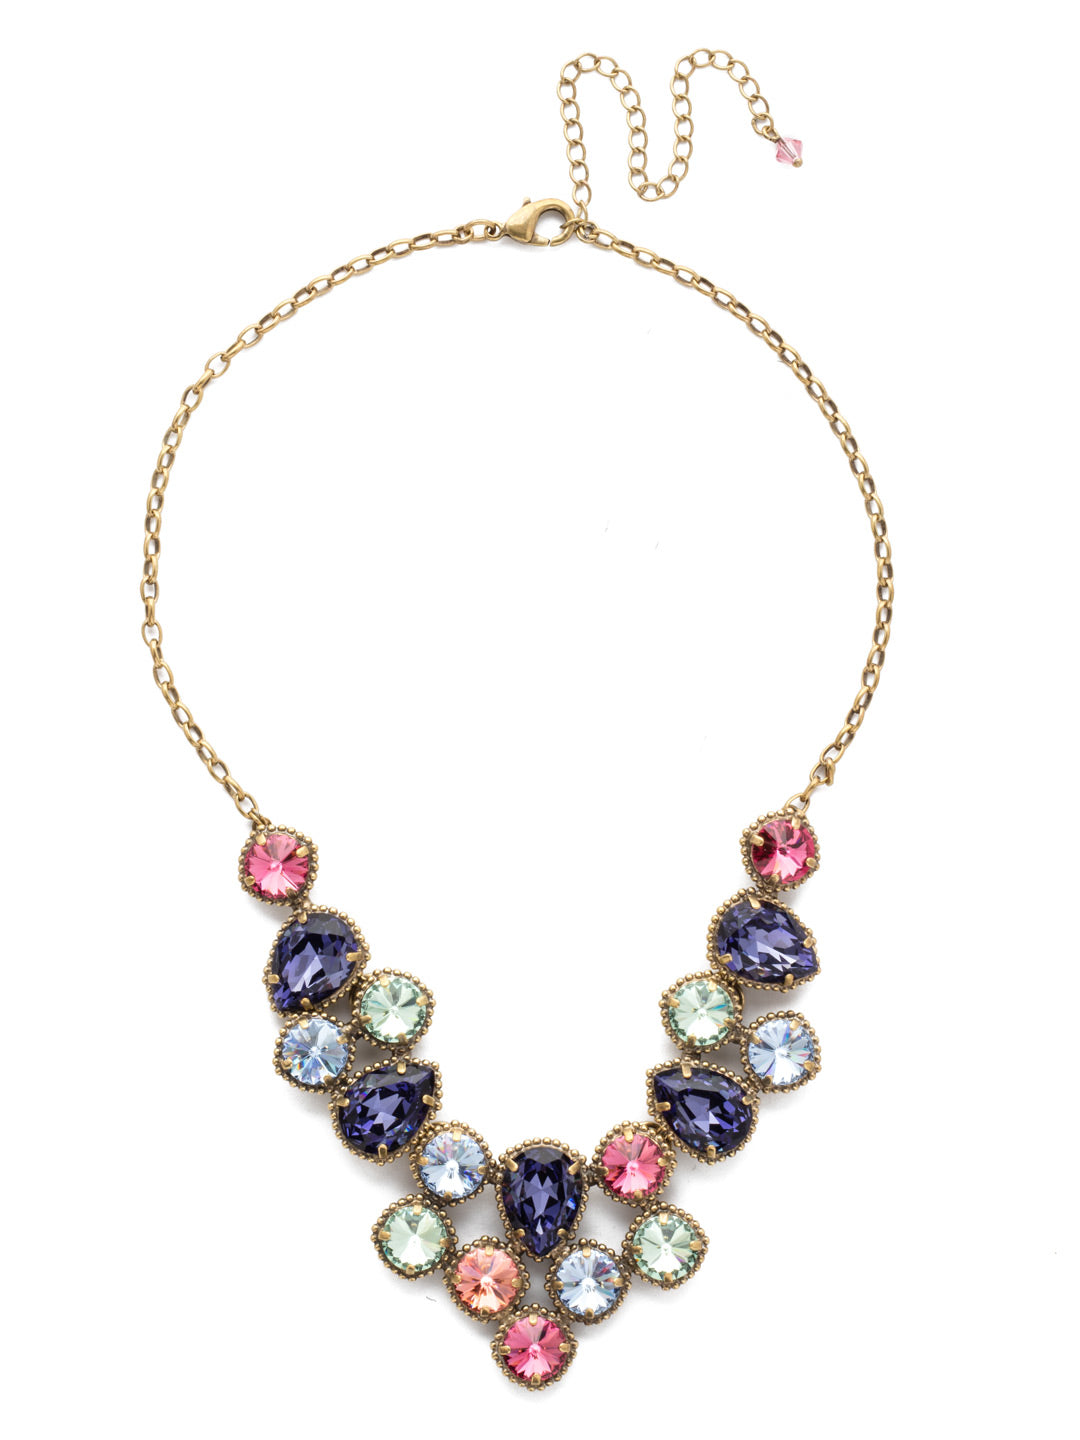 Armina Necklace Statement Necklace - NEA43AGBHB - <p>Bubbly and beautiful! This absolutely stunning bib necklace features round and pear shaped crystals arranged together in a symmetrical yet free flowing design. From Sorrelli's Bohemian Bright collection in our Antique Gold-tone finish.</p>